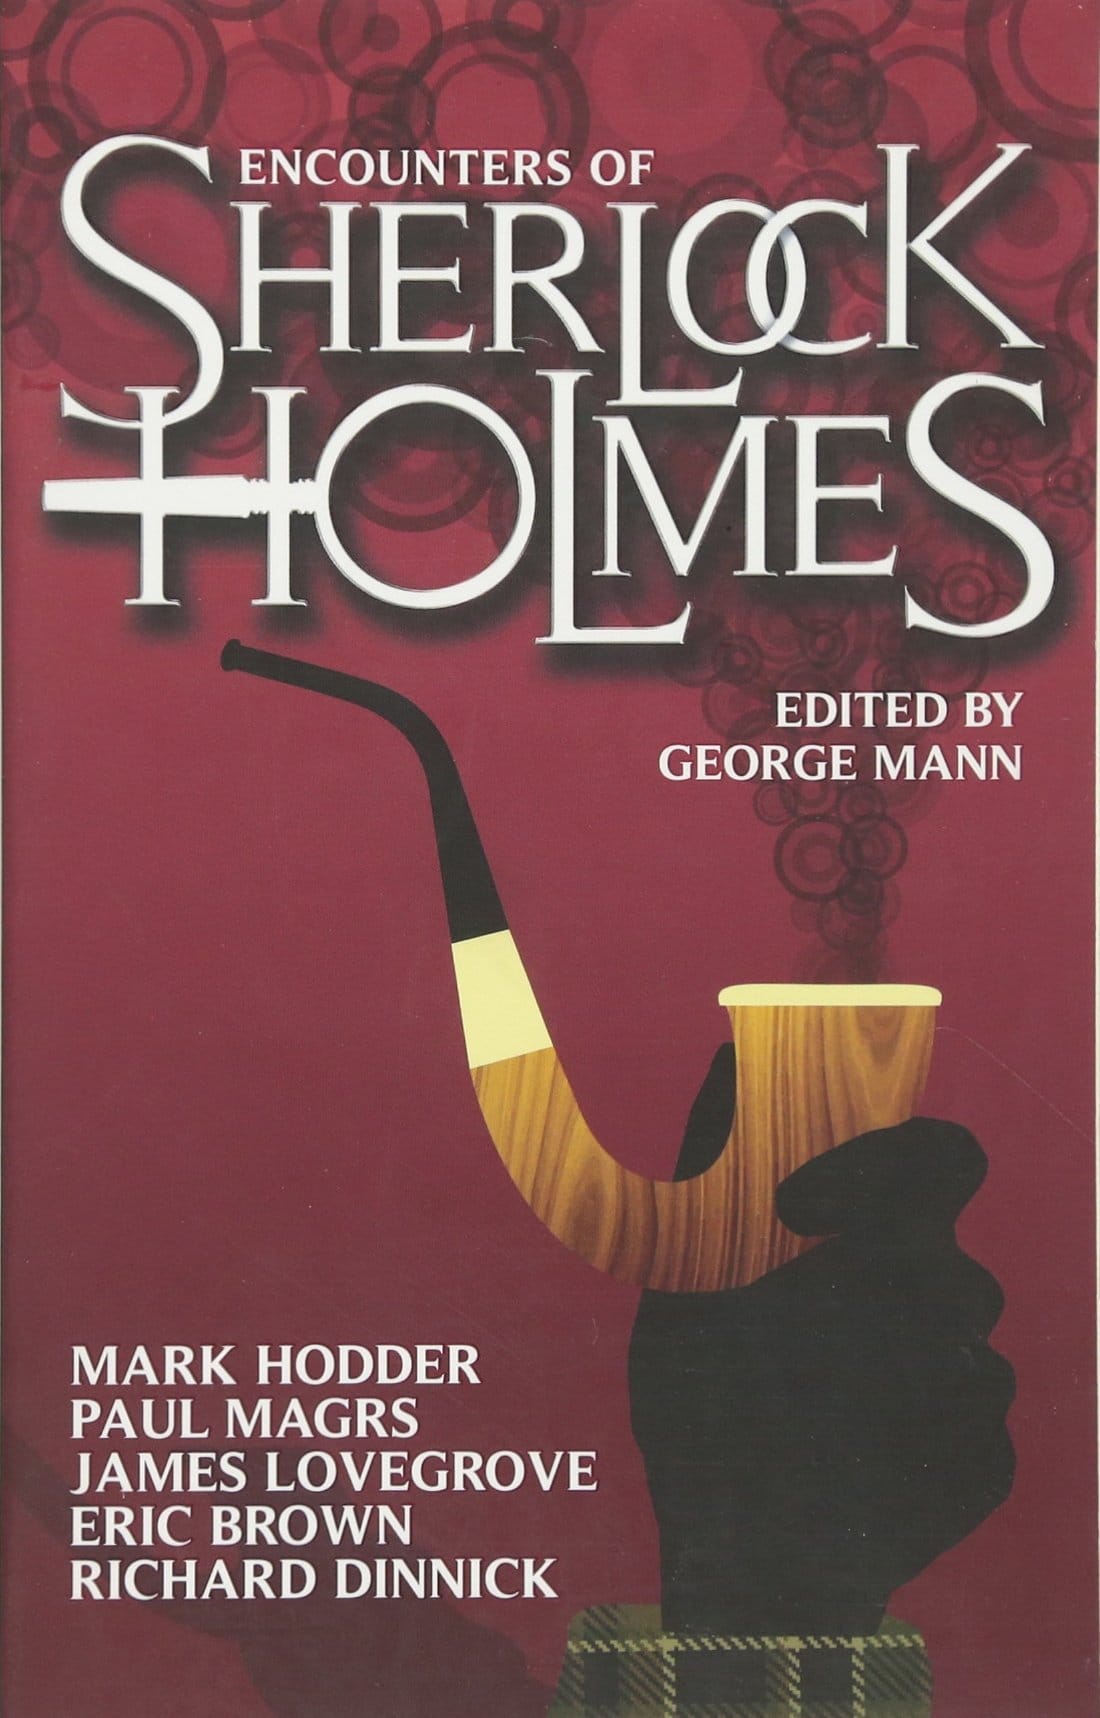 review sherlock holmes legacy of deeds